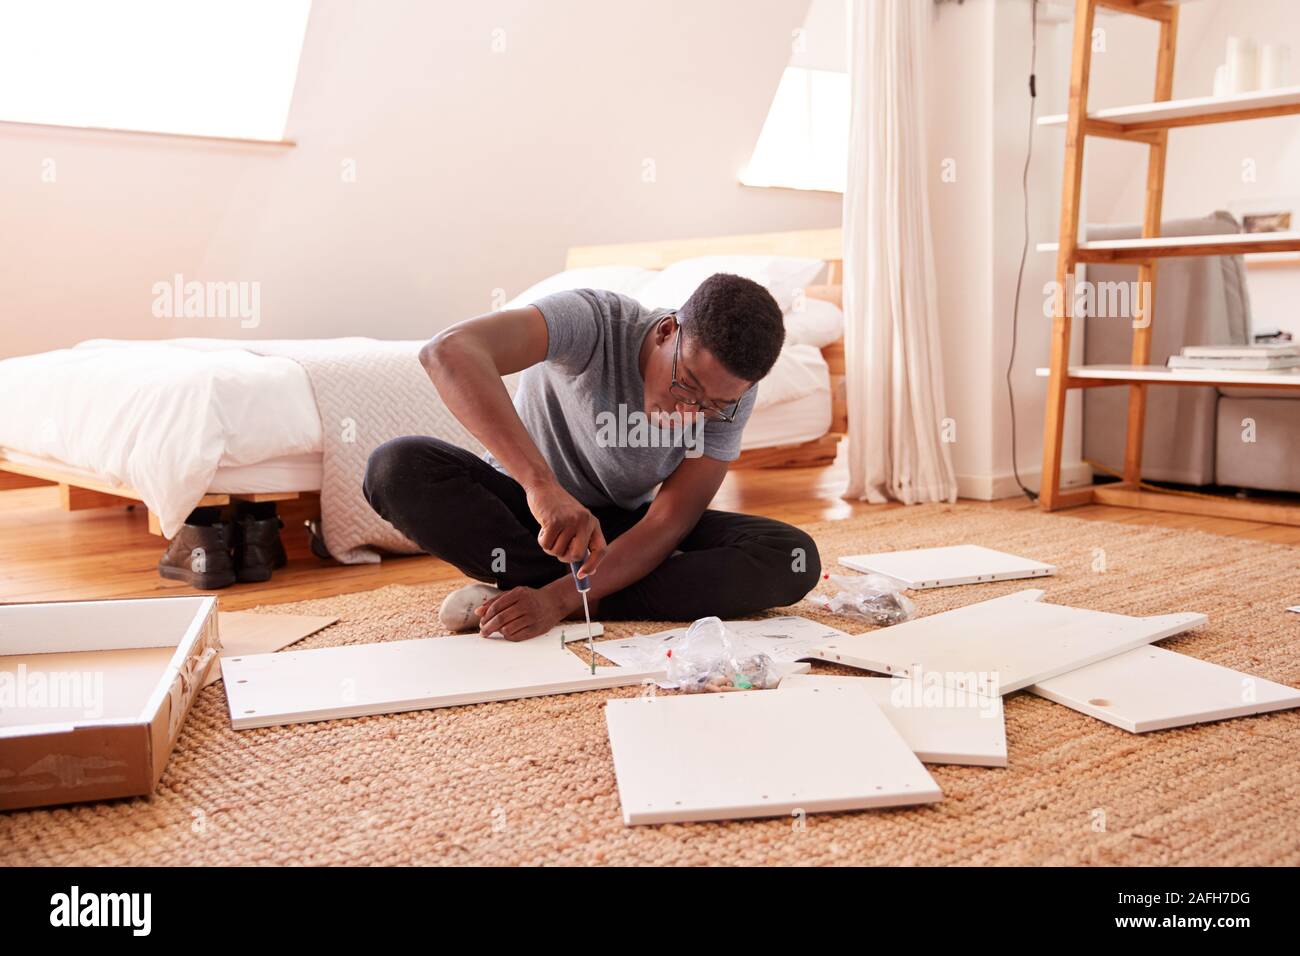 Man In New Home Putting Together Self Assembly Furniture Stock Photo